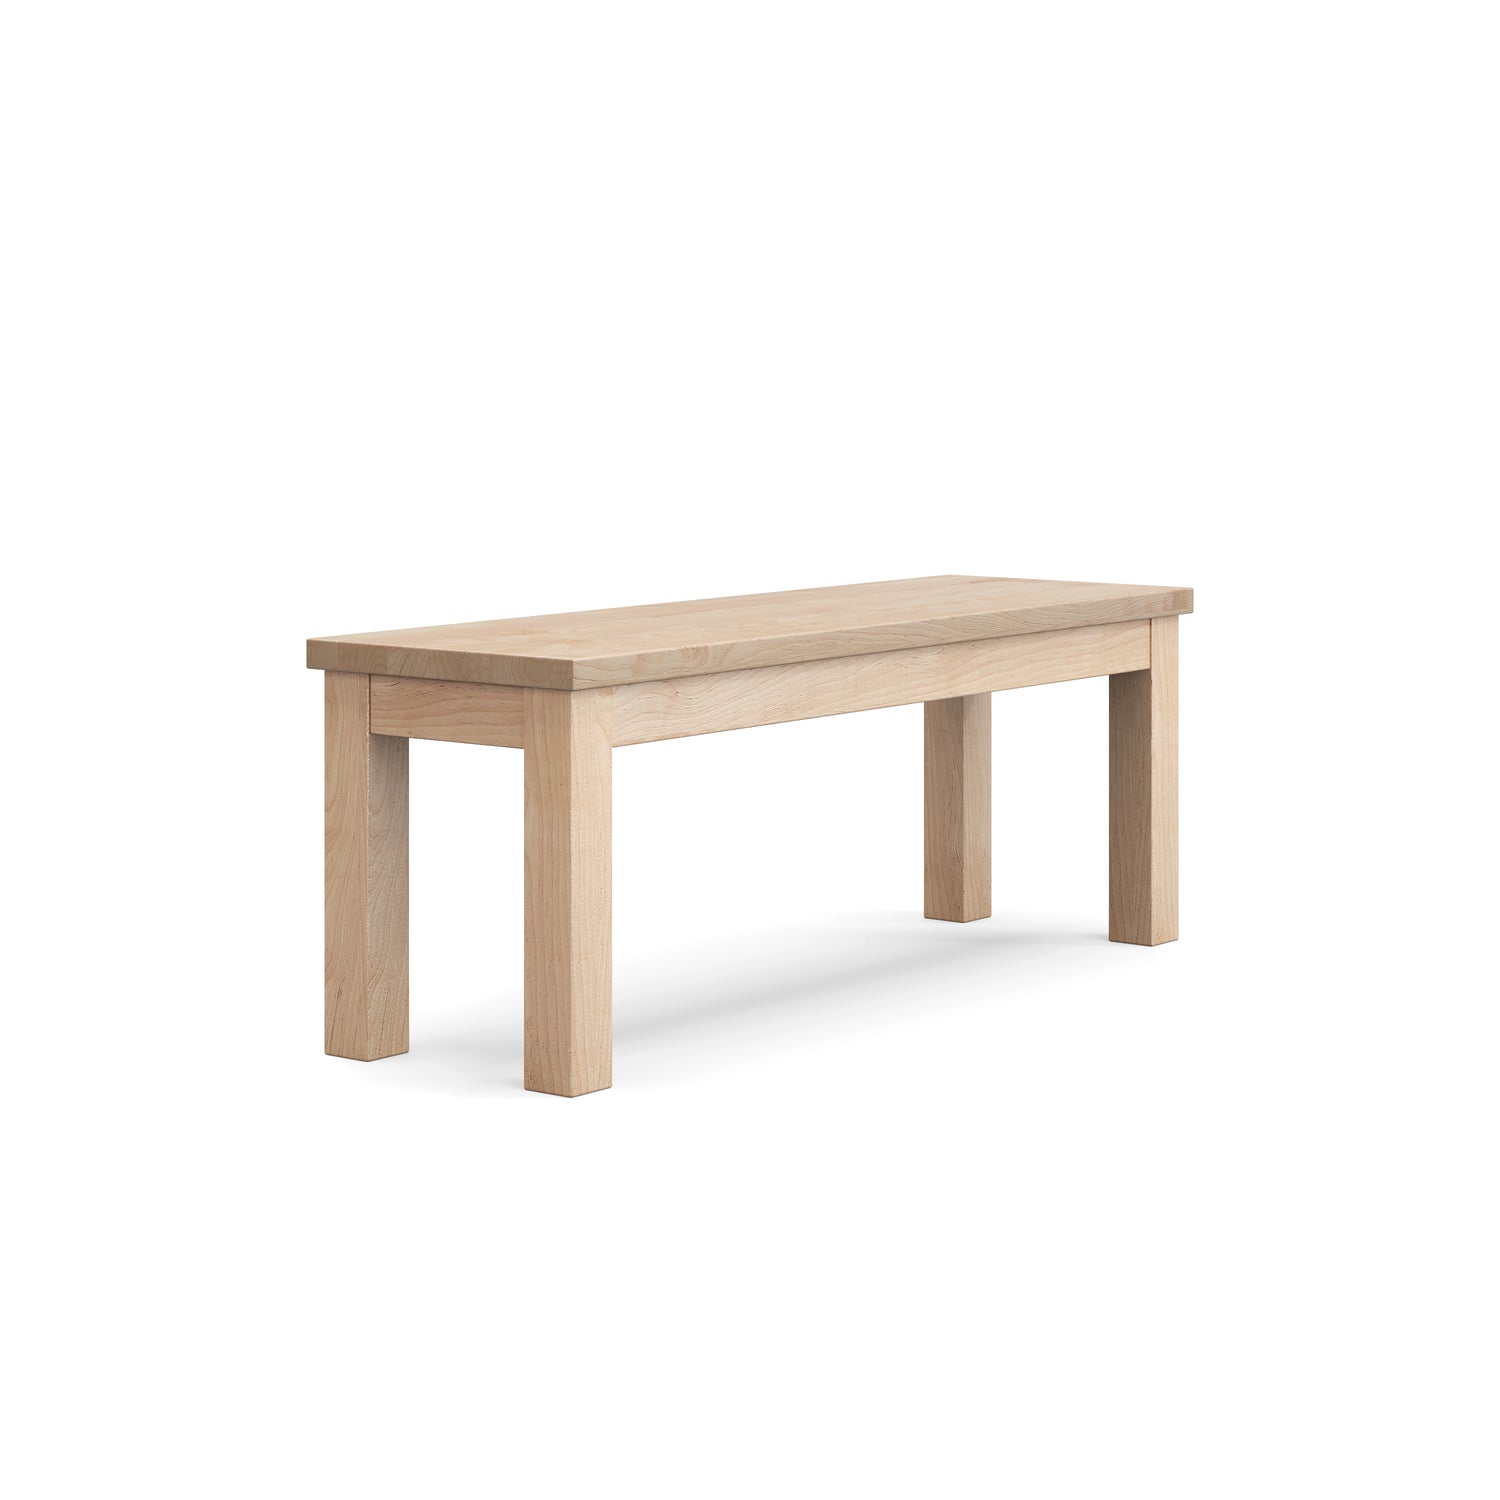 Classic solid wood bench